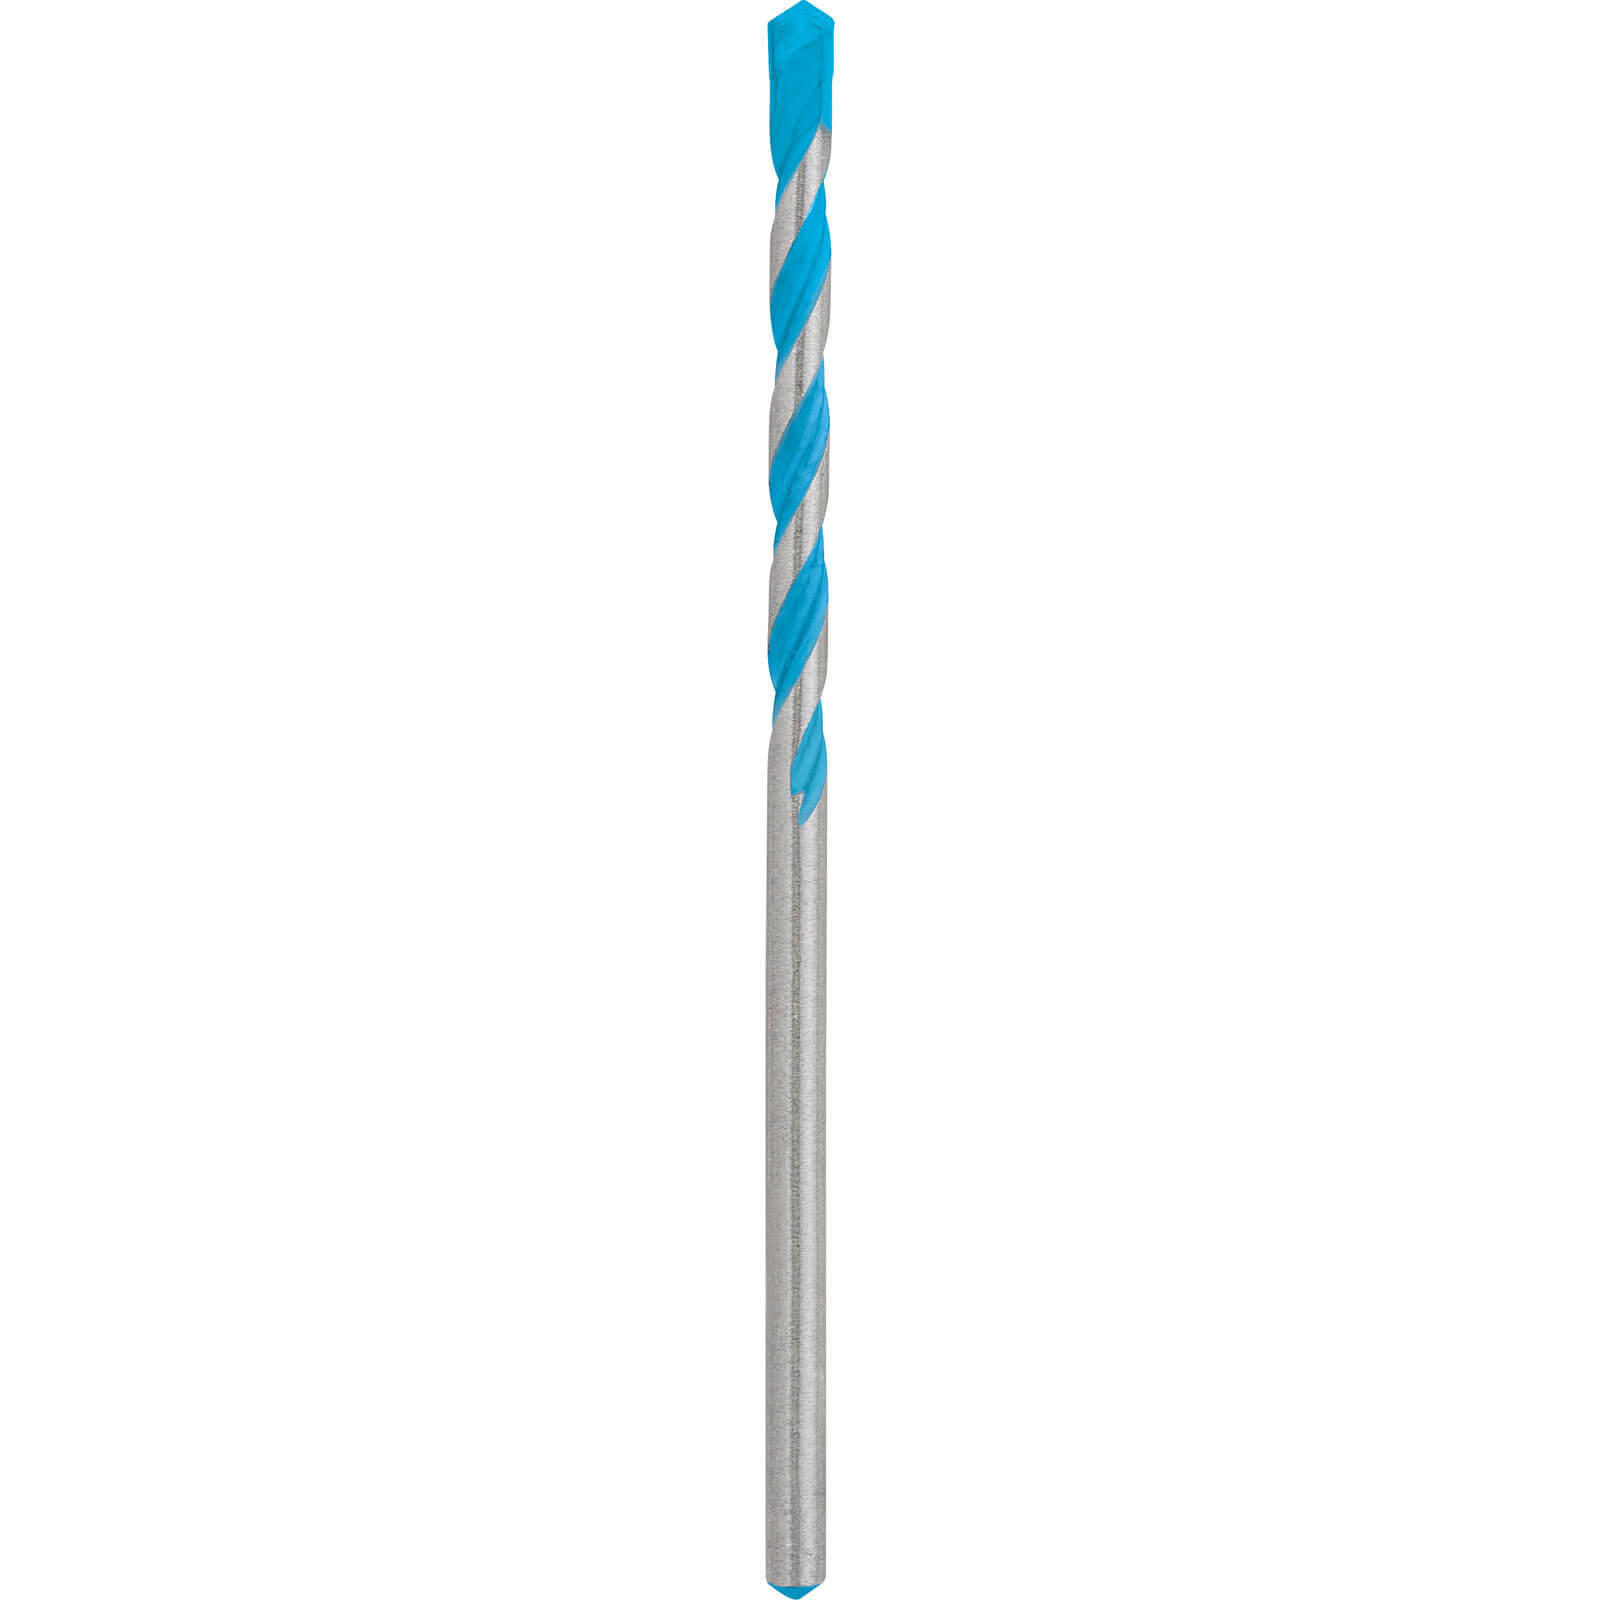 Photo of Bosch Expert Cyl-9 Multi Construction Drill Bit 3mm 70mm Pack Of 1